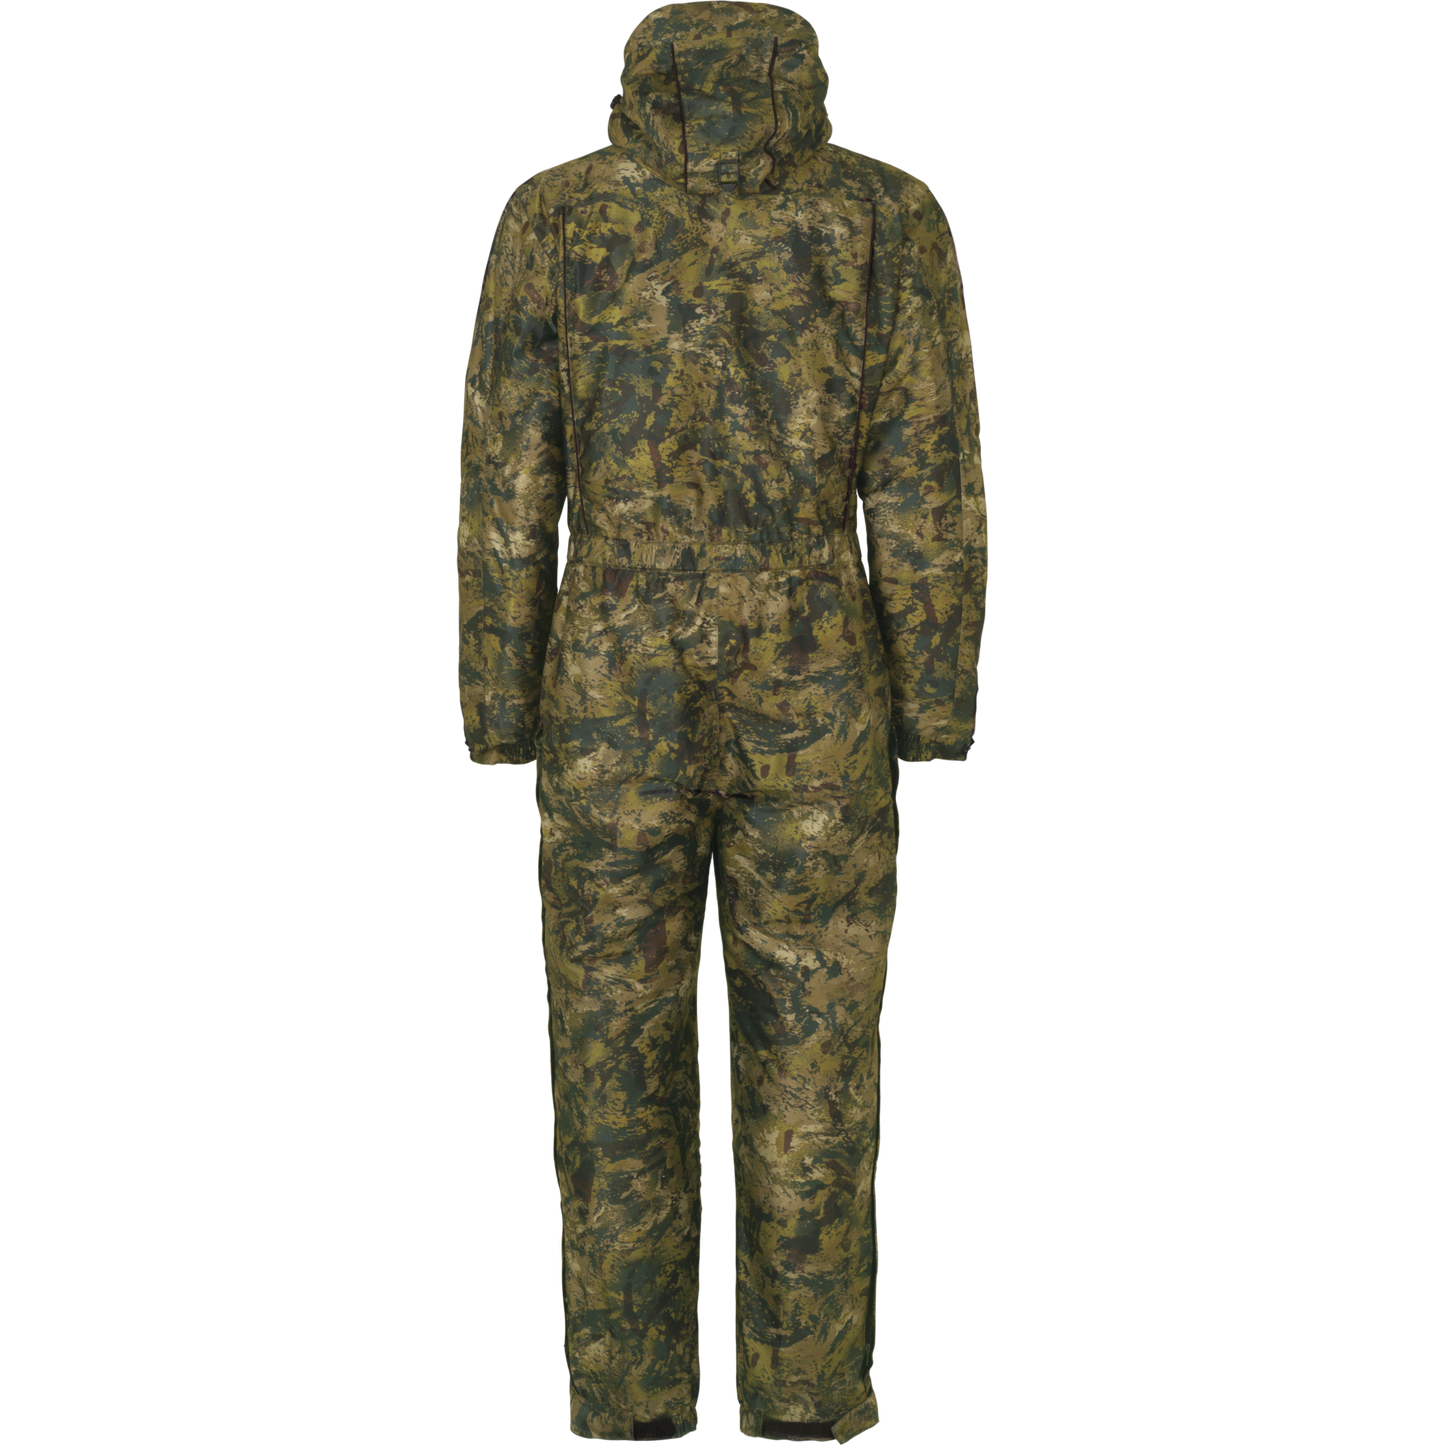 Outthere camo onepiece